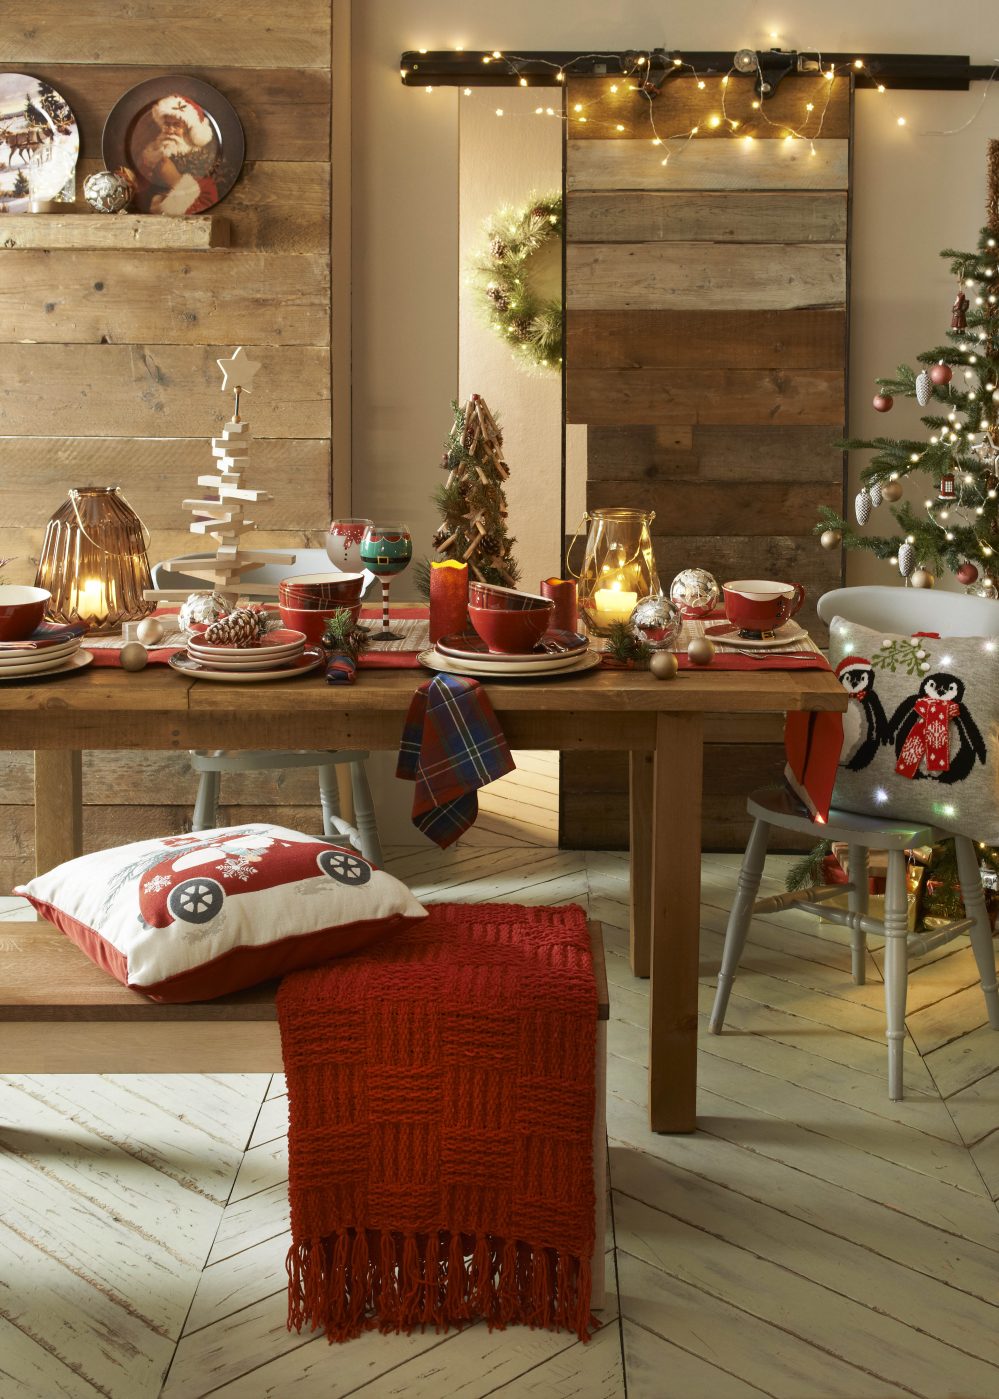 Top 10 Christmas gifts for the home